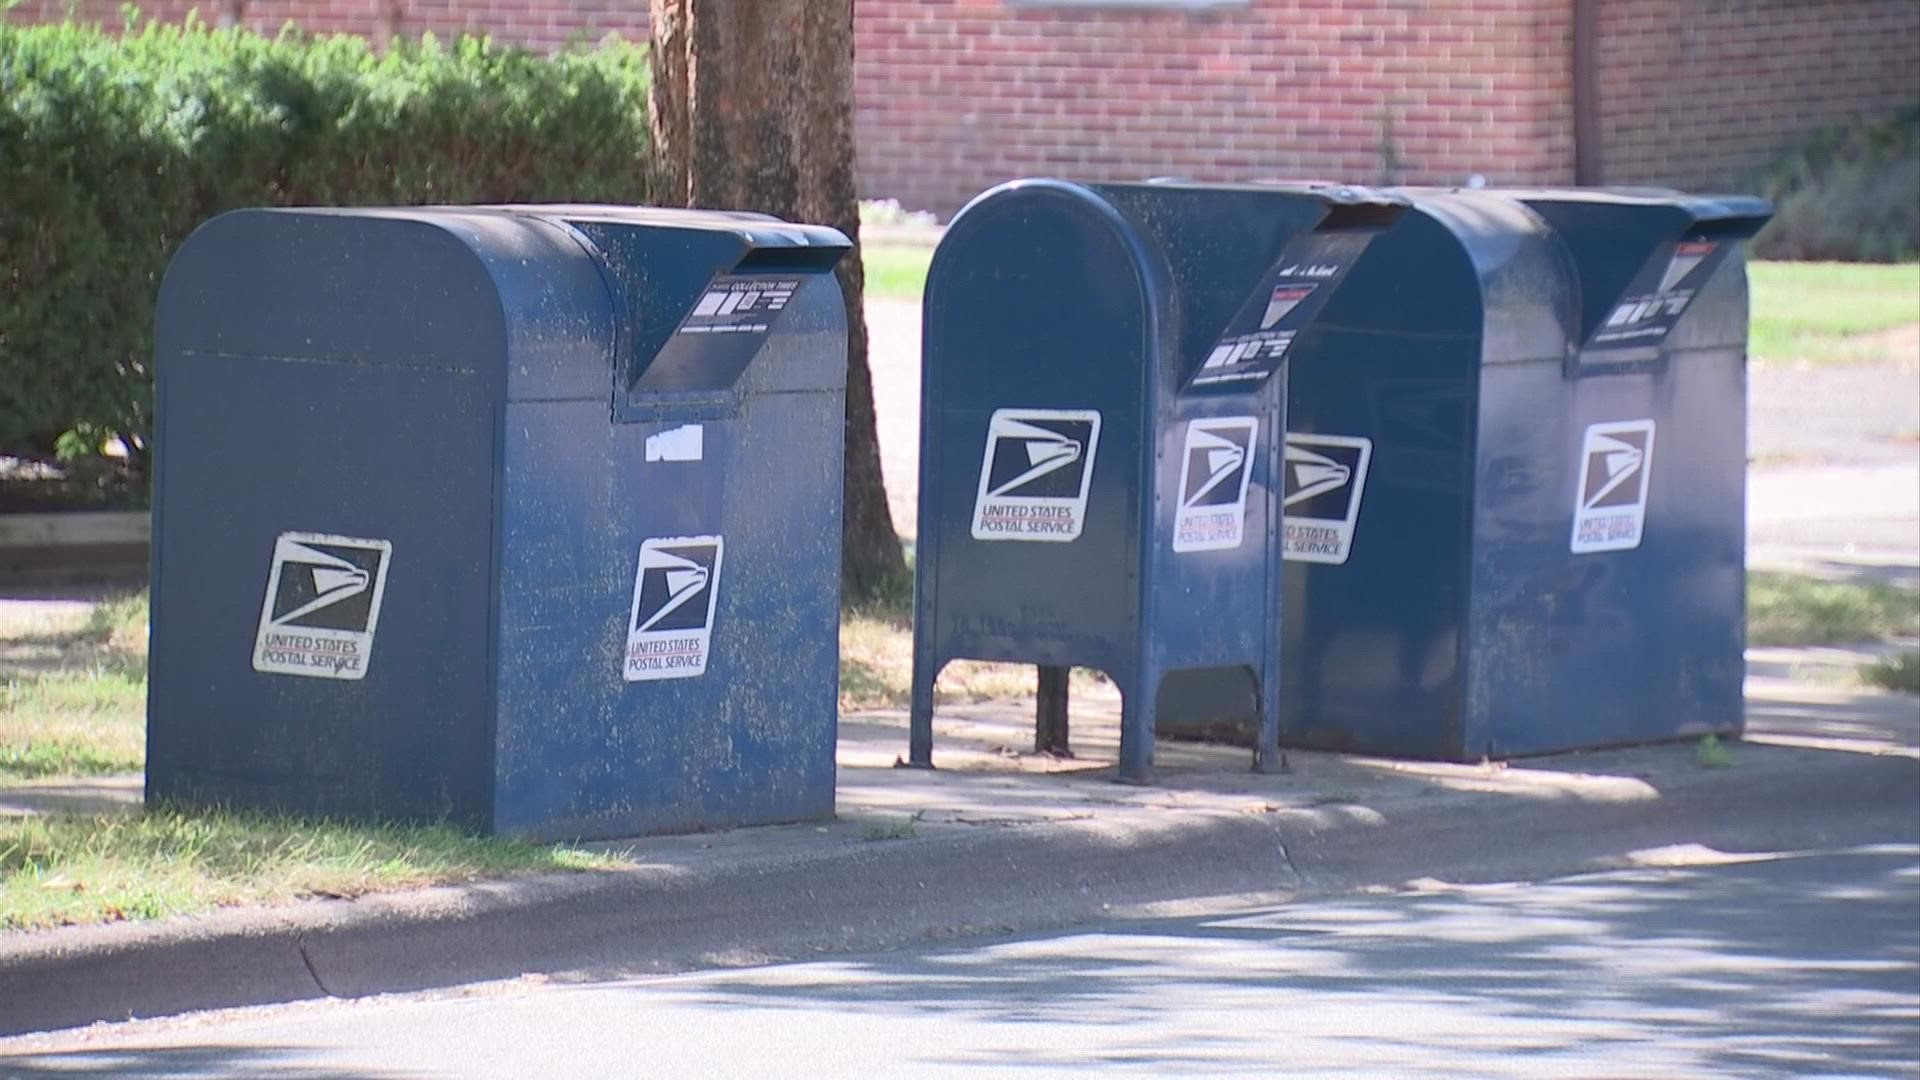 Two people, who live on opposite ends of Columbus, said they've been having issues receiving their mail lately.